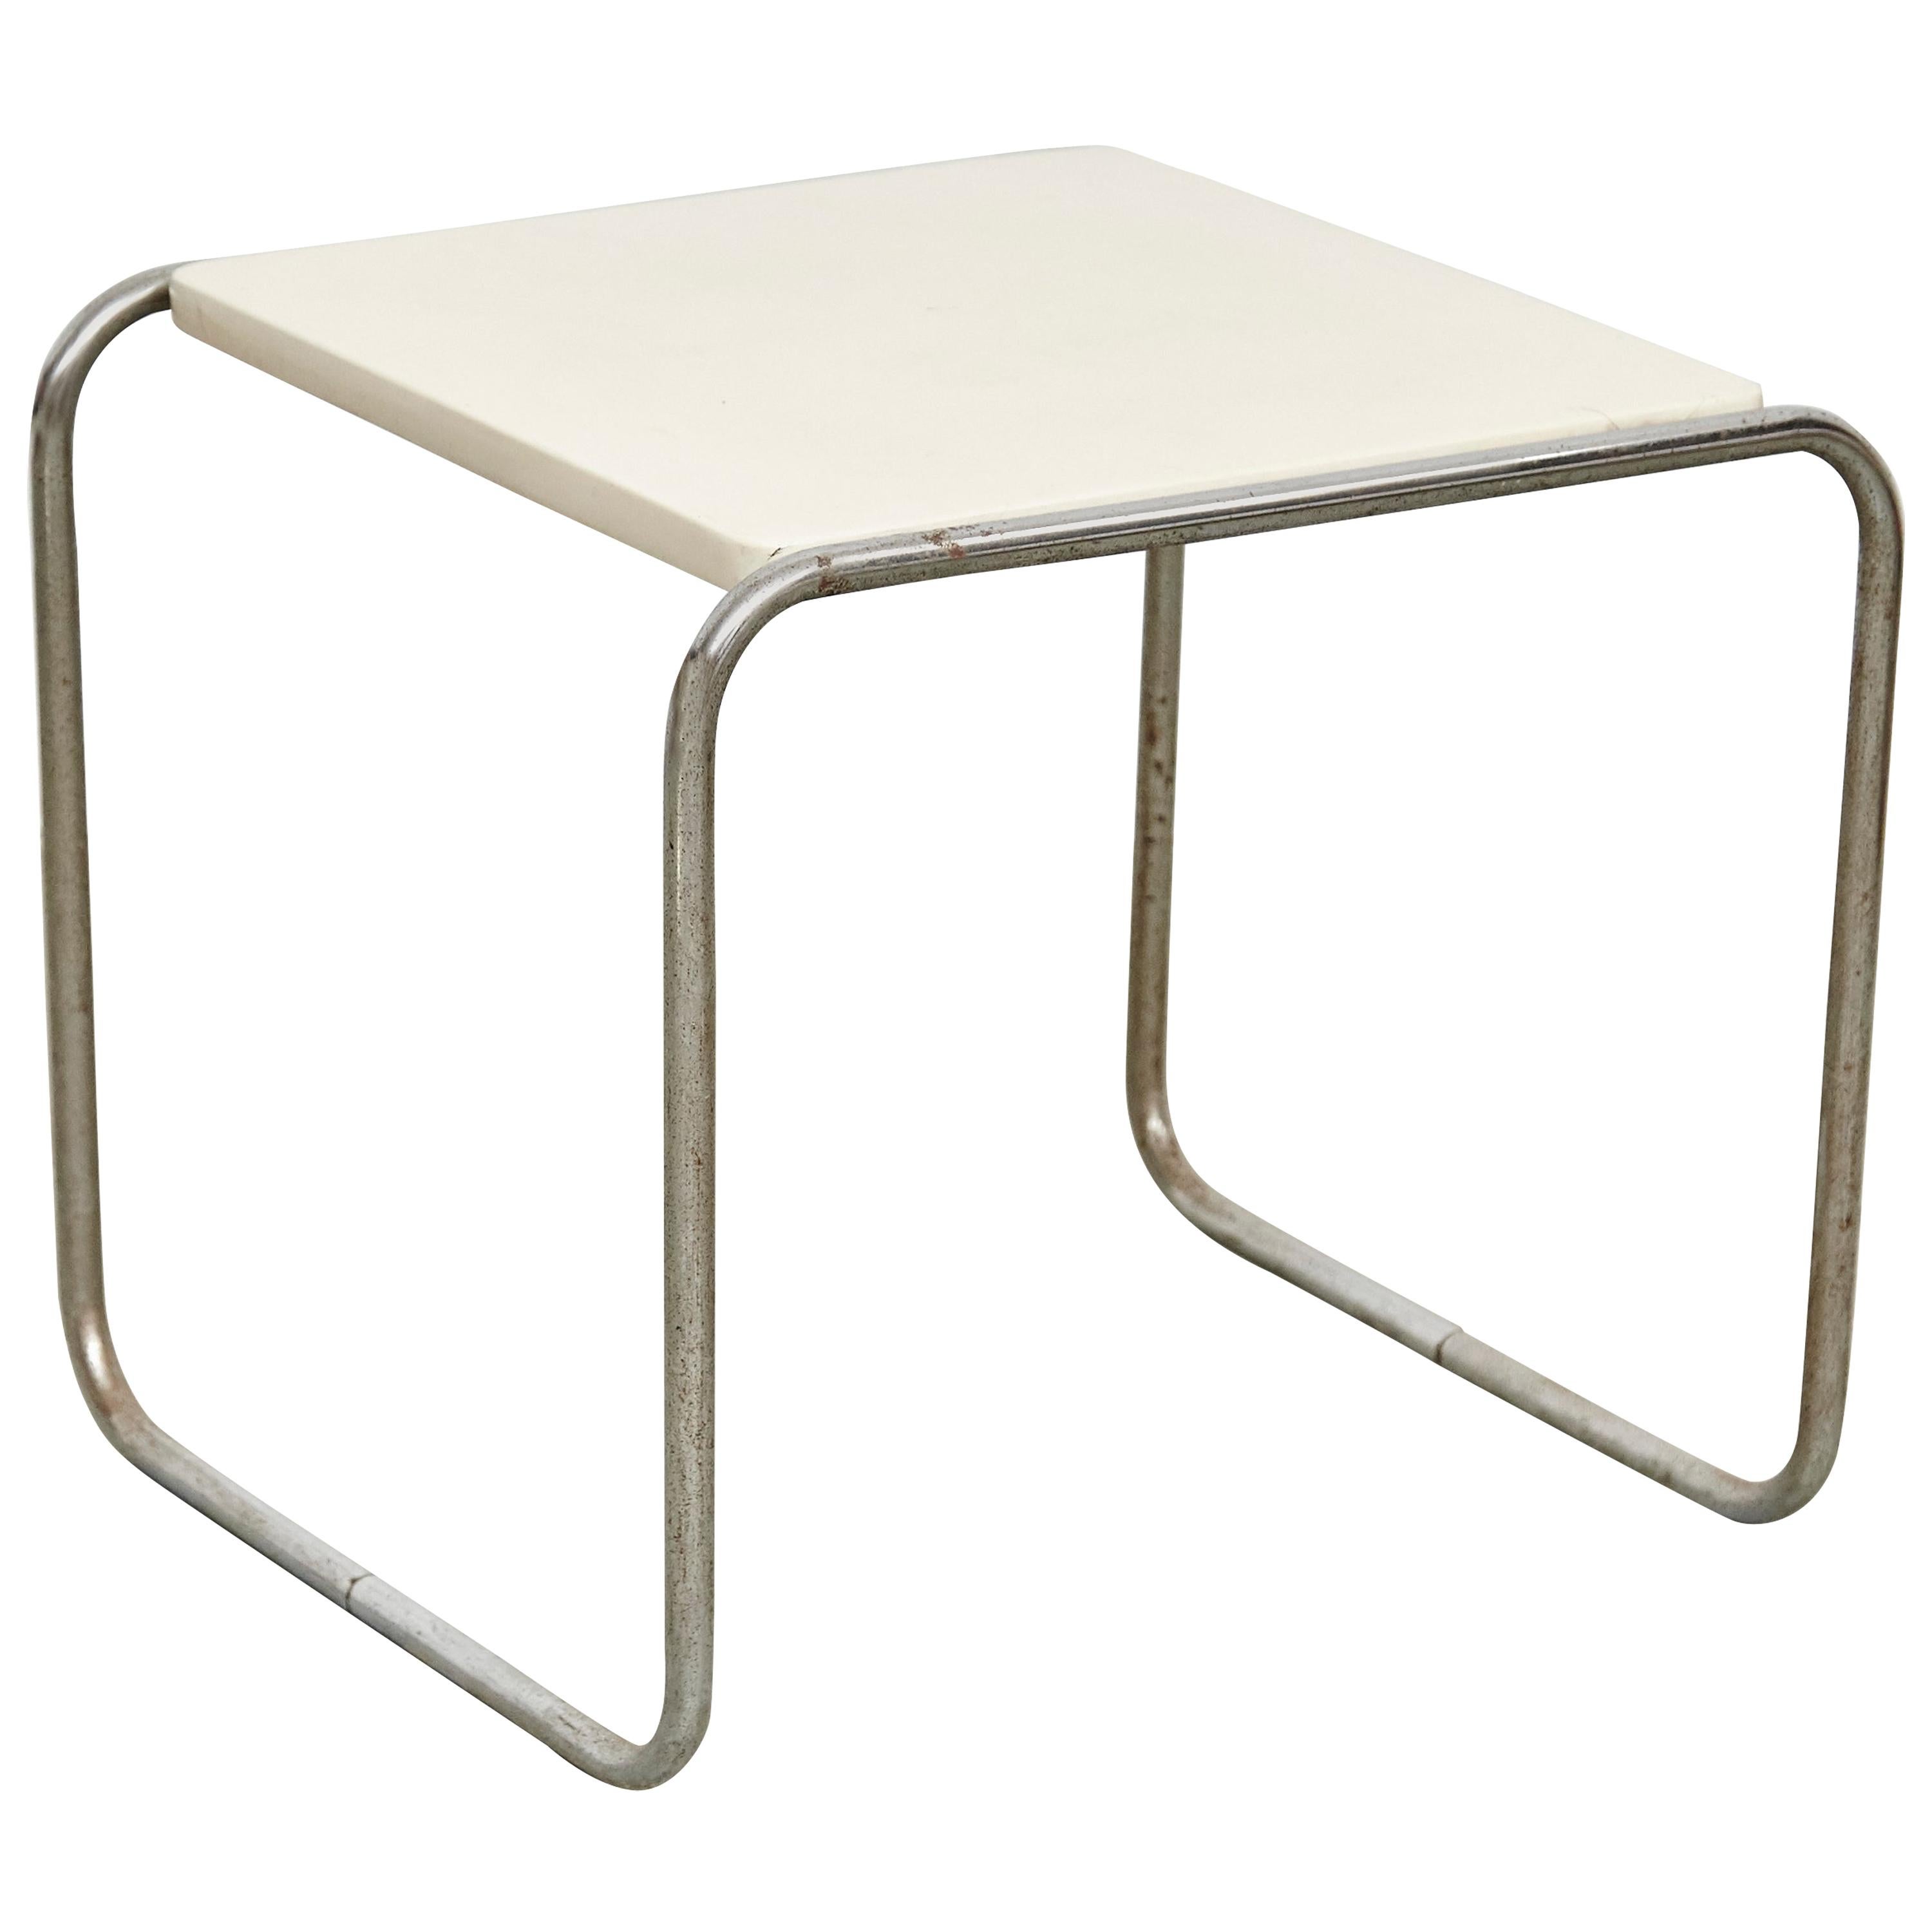 Marcel Breuer Coffee Table White Wood and Steel, circa 1960